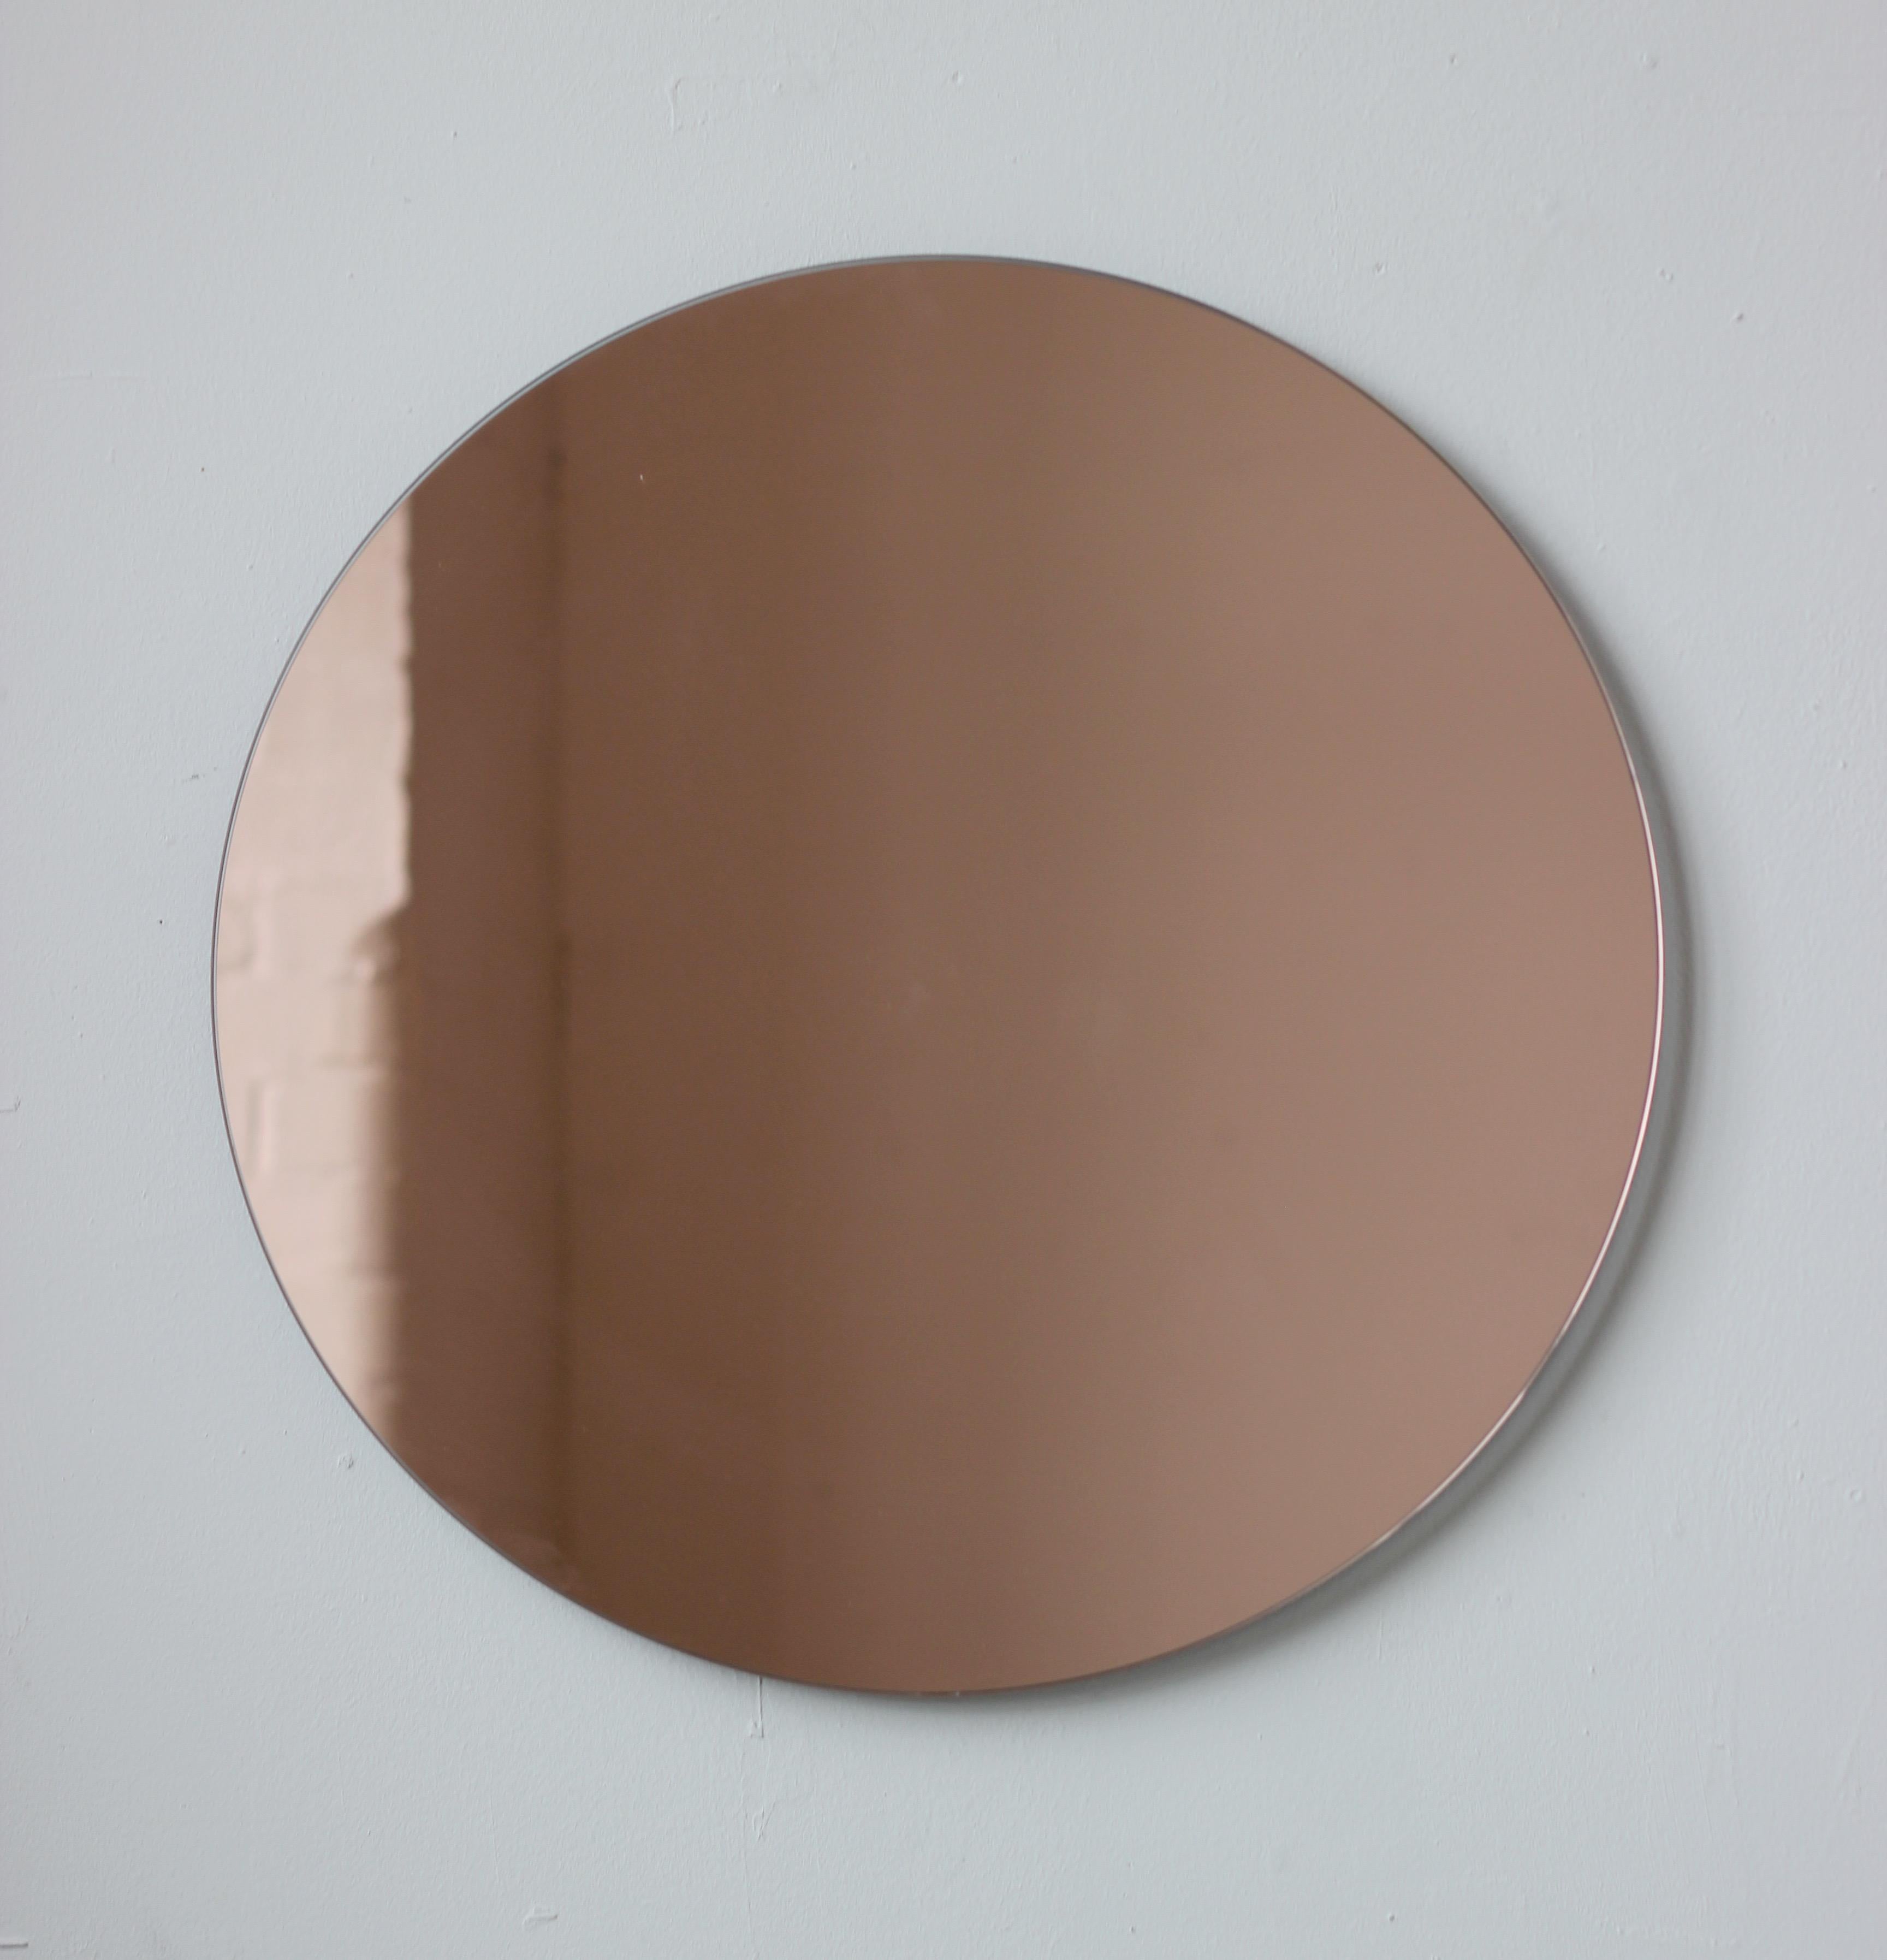 Minimalist rose gold / peach tinted Orbis™ round frameless mirror with a floating effect. Quality design that ensures the mirror sits perfectly parallel to the wall. Designed and made in London, UK.

Fitted with professional plates not visible once